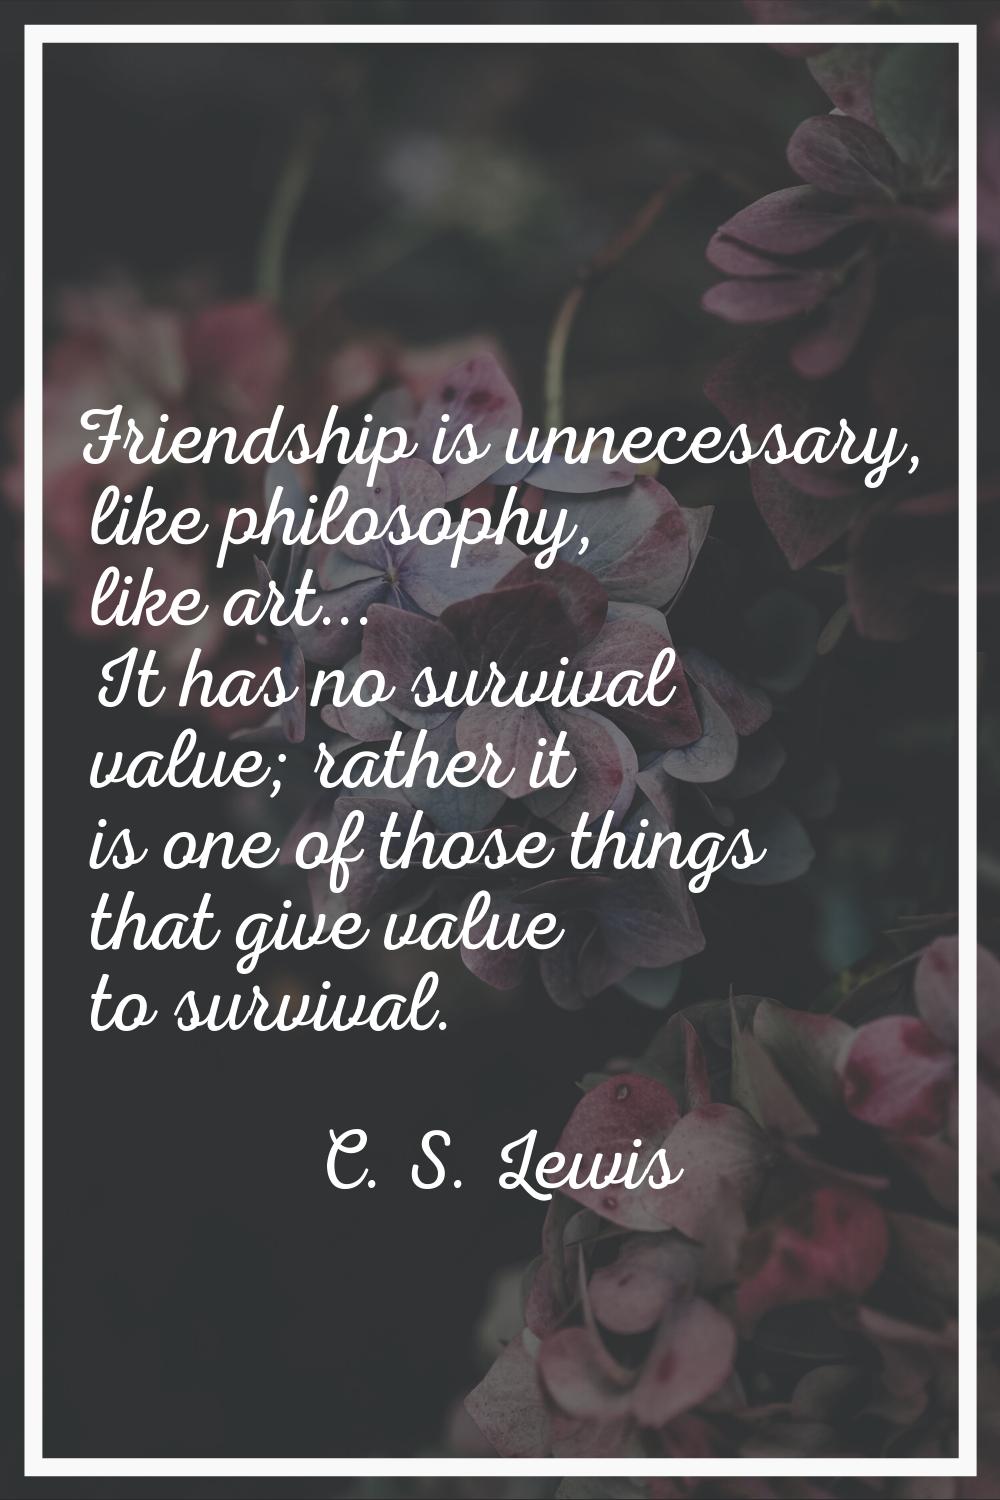 Friendship is unnecessary, like philosophy, like art... It has no survival value; rather it is one 